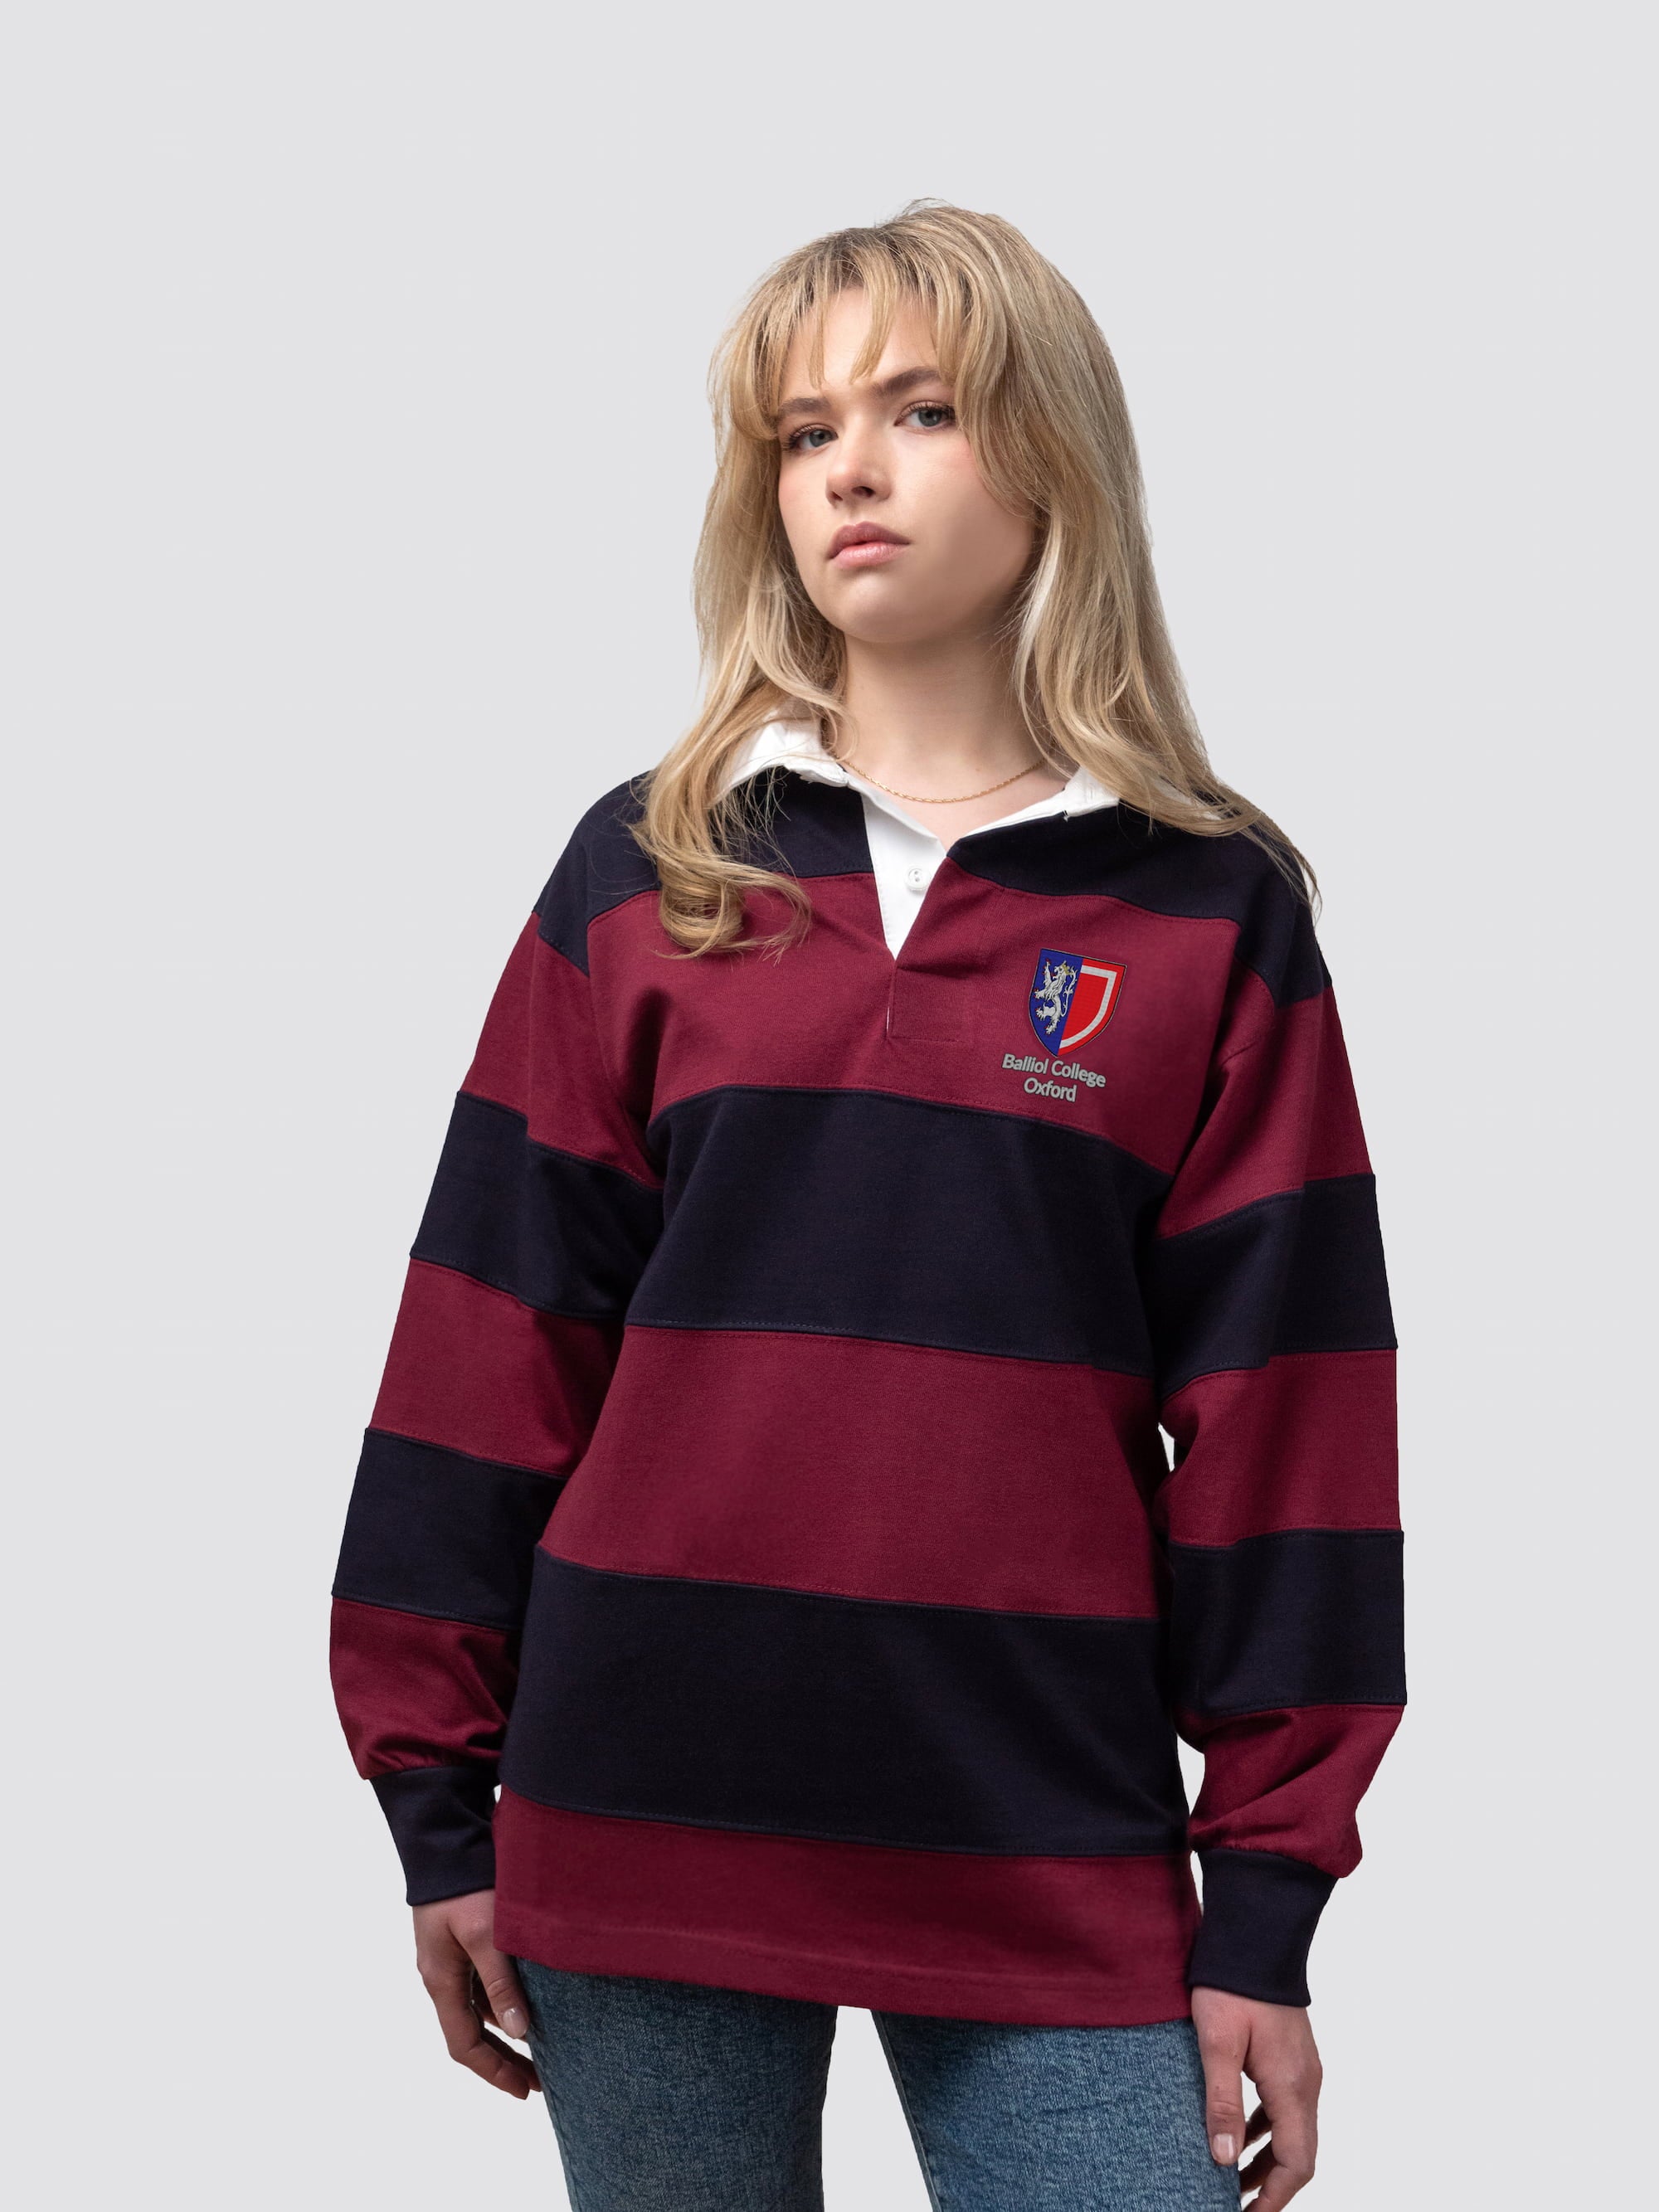 Balliol College rugby shirt, with burgundy and navy stripes